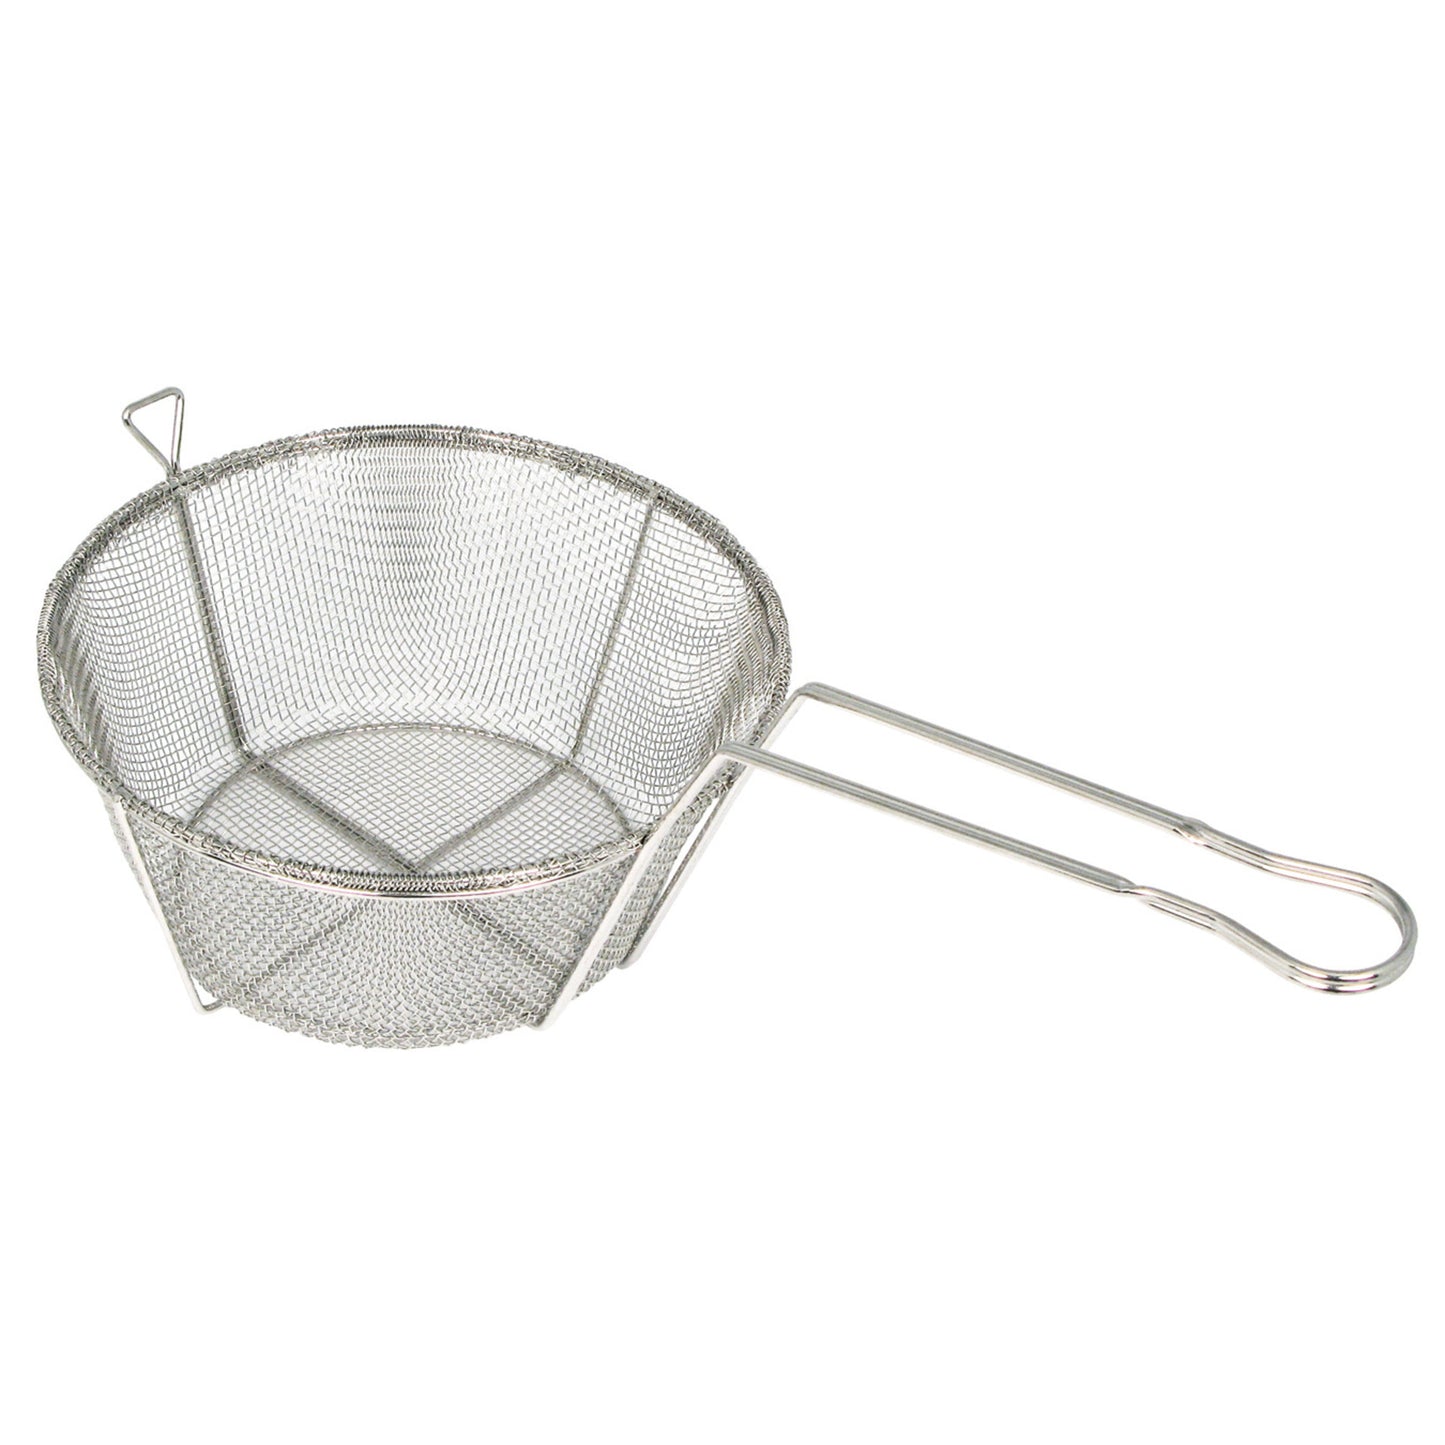 FBRS-11 - Round 6mm Mesh Wire Fry Basket - 10-7/16" Dia